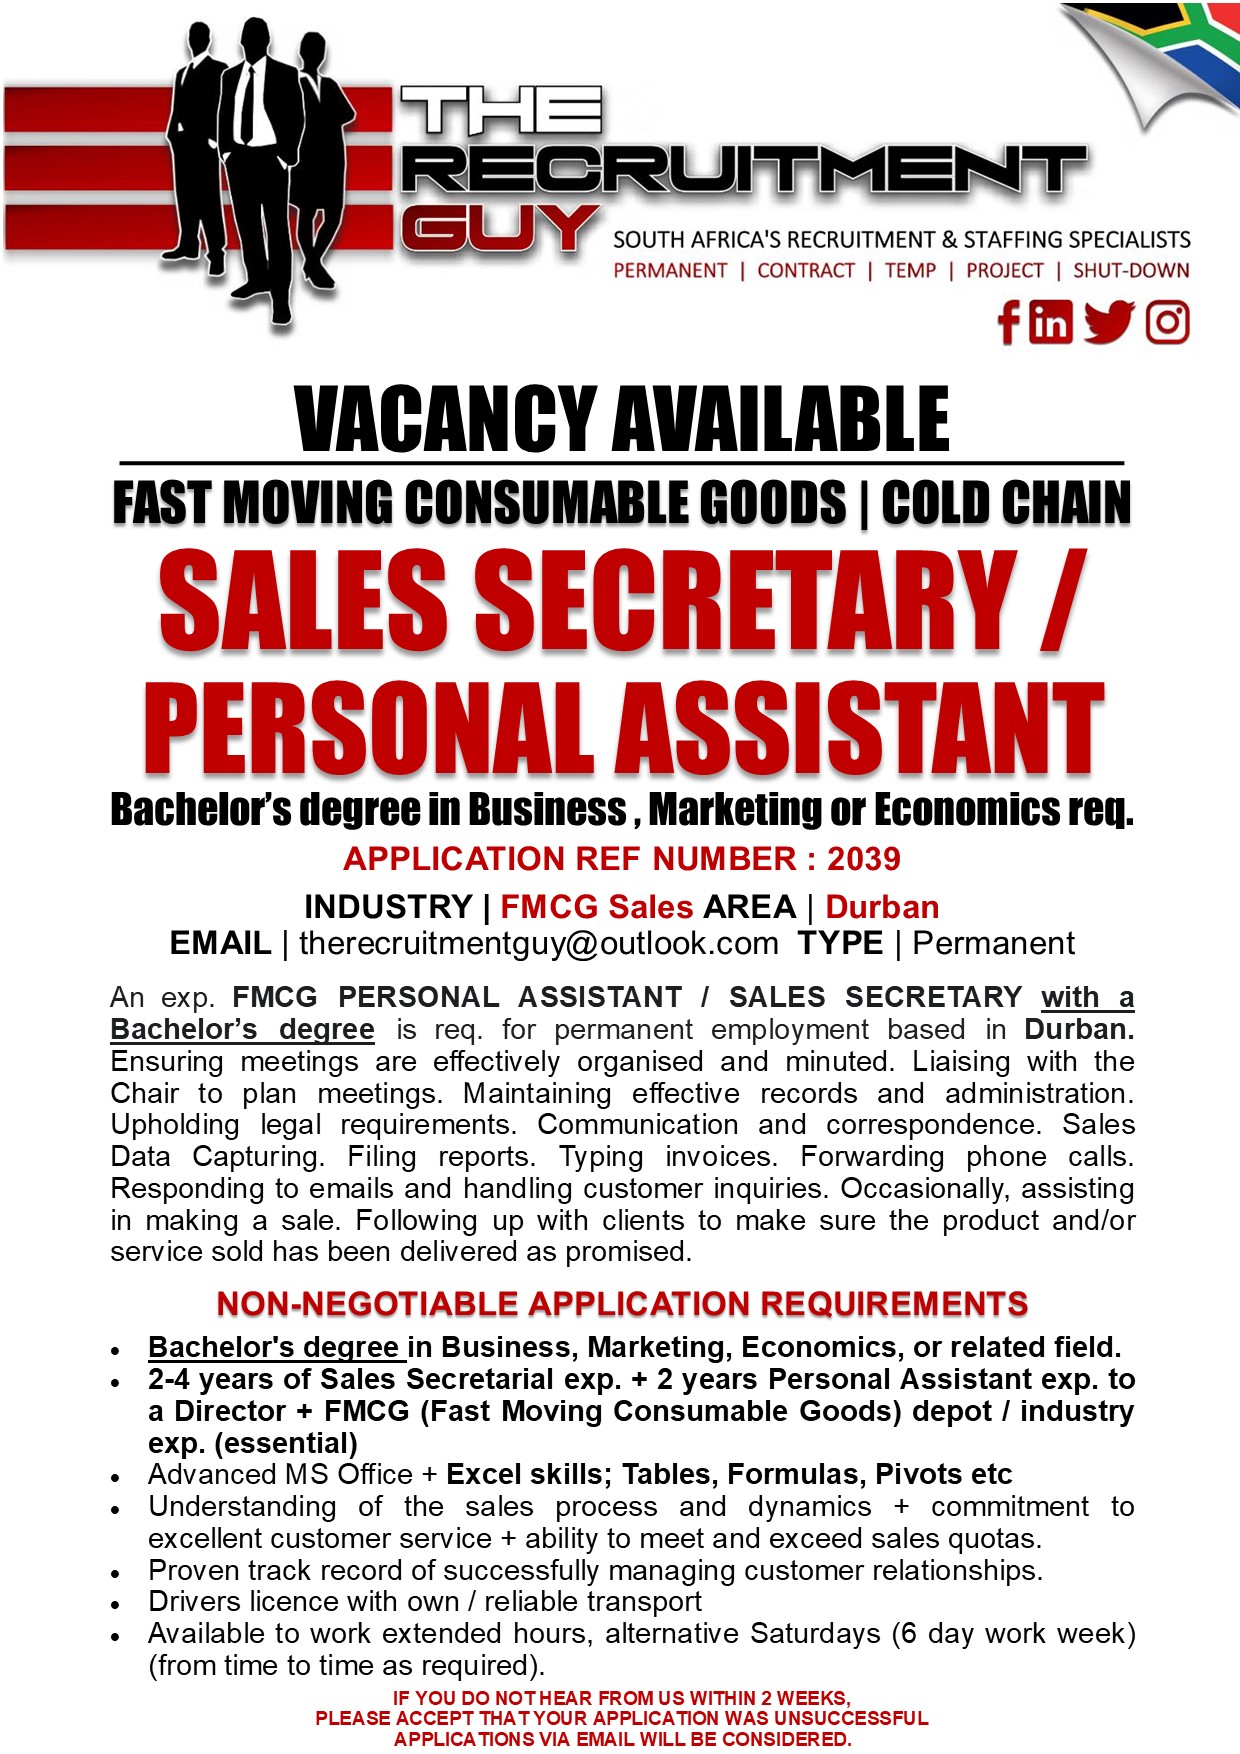 GUY SOUTH AFRICA'S RECRUITMENT & STAFFING SPECIALISTS

PERMANENT | CONTRACT | TEMP | PROJECT | SHUT-DOWN

FOYE
VACANCY AVAILABLE
FAST MOVING CONSUMABLE GOODS | COLD CHAIN

SALES SECRETARY /
PERSONAL ASSISTANT

Bachelor's degree in Business, Marketing or Economics req.
APPLICATION REF NUMBER : 2039

INDUSTRY | FMCG Sales AREA | Durban
EMAIL | therecruitmentguy@outlook.com TYPE | Permanent

An exp. FMCG PERSONAL ASSISTANT / SALES SECRETARY with a
Bachelor's degree is req. for permanent employment based in Durban.
Ensuring meetings are effectively organised and minuted. Liaising with the
Chair to plan meetings. Maintaining effective records and administration
Upholding legal requirements. Communication and correspondence. Sales
Data Capturing. Filing reports. Typing invoices. Forwarding phone calls
Responding to emails and handling customer inquiries. Occasionally, assisting
in making a sale. Following up with clients to make sure the product and/or
service sold has been delivered as promised

NON-NEGOTIABLE APPLICATION REQUIREMENTS

« Bachelor's degree in Business, Marketing, Economics, or related field.

« 2-4 years of Sales Secretarial exp. + 2 years Personal Assistant exp. to
a Director + FMCG (Fast Moving Consumable Goods) depot / industry
exp. (essential)

« Advanced MS Office + Excel skills; Tables, Formulas, Pivots etc

« Understanding of the sales process and dynamics + commitment to
excellent customer service + ability to meet and exceed sales quotas

« Proven track record of successfully managing customer relationships

« Drivers licence with own / reliable transport

« Available to work extended hours, alternative Saturdays (6 day work week)
(from time to time as required)

IF YOU DO NOTHEAR FROM US WITHIN 2 WEEKS,
PLEASE ACCEPT THAT YOUR APPLICATION WAS UNSUCCESSFUL
APPLICATIONS VIA EMAIL WILL BE CONSIDERED.